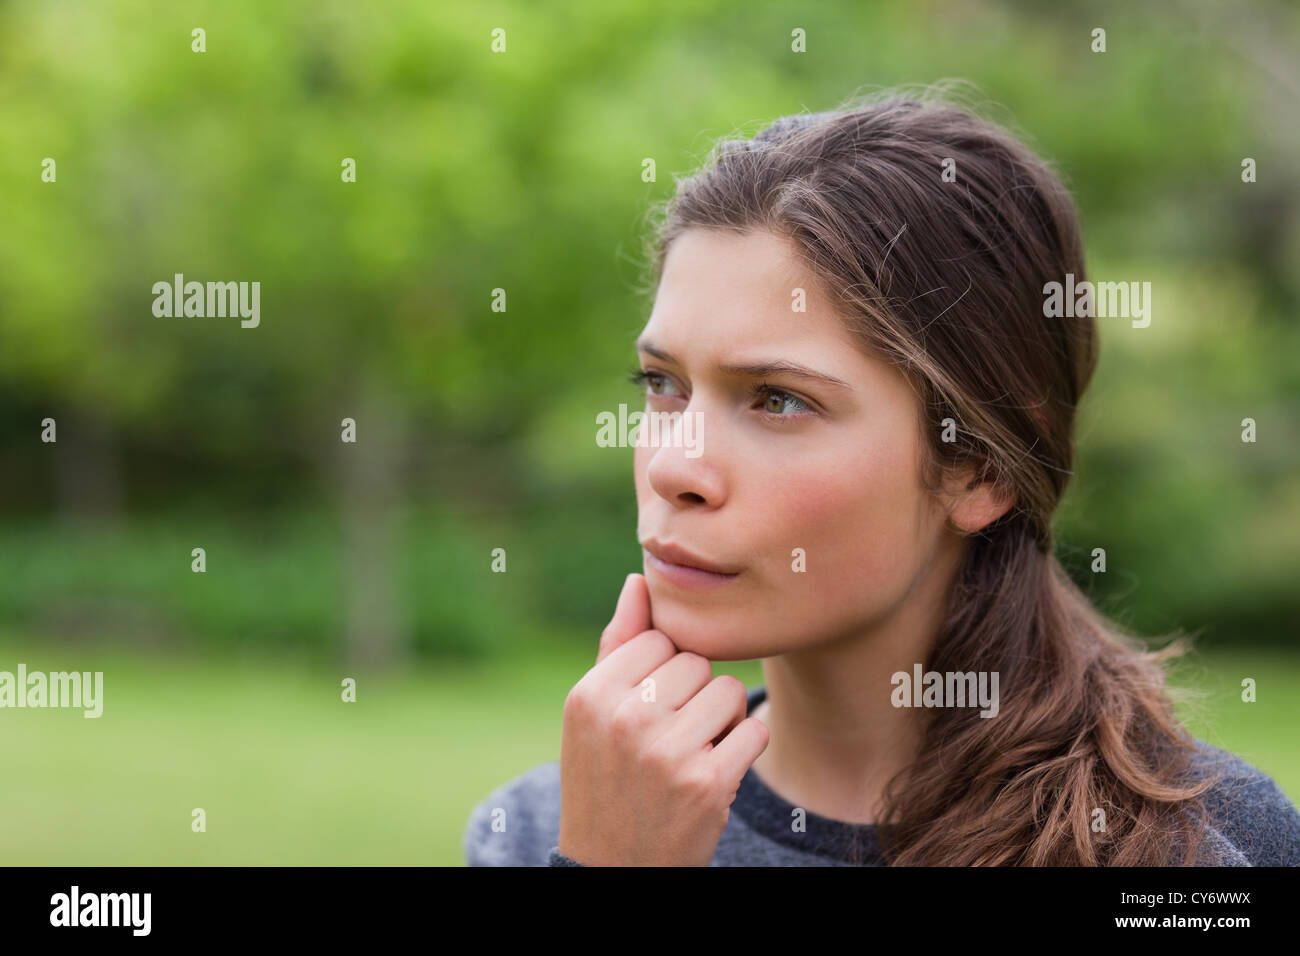 Young thoughtful girl standing upright in the countryside Stock Photo